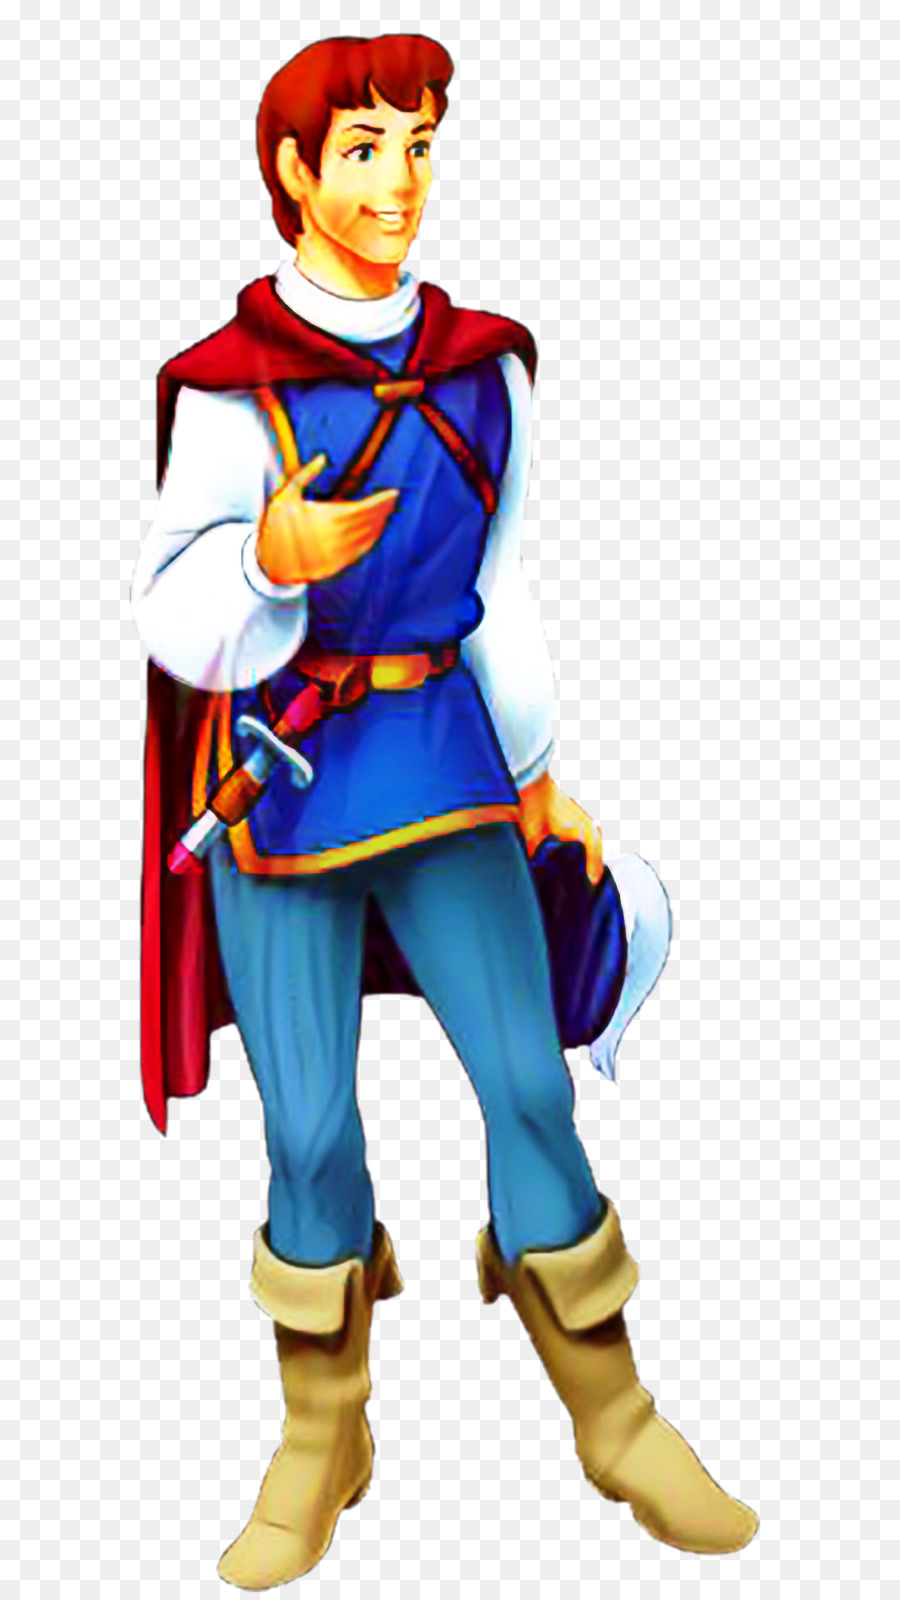 Prince Charming Snow White and the Seven Dwarfs Clip art -  png download - 668*1600 - Free Transparent Prince Charming png Download.